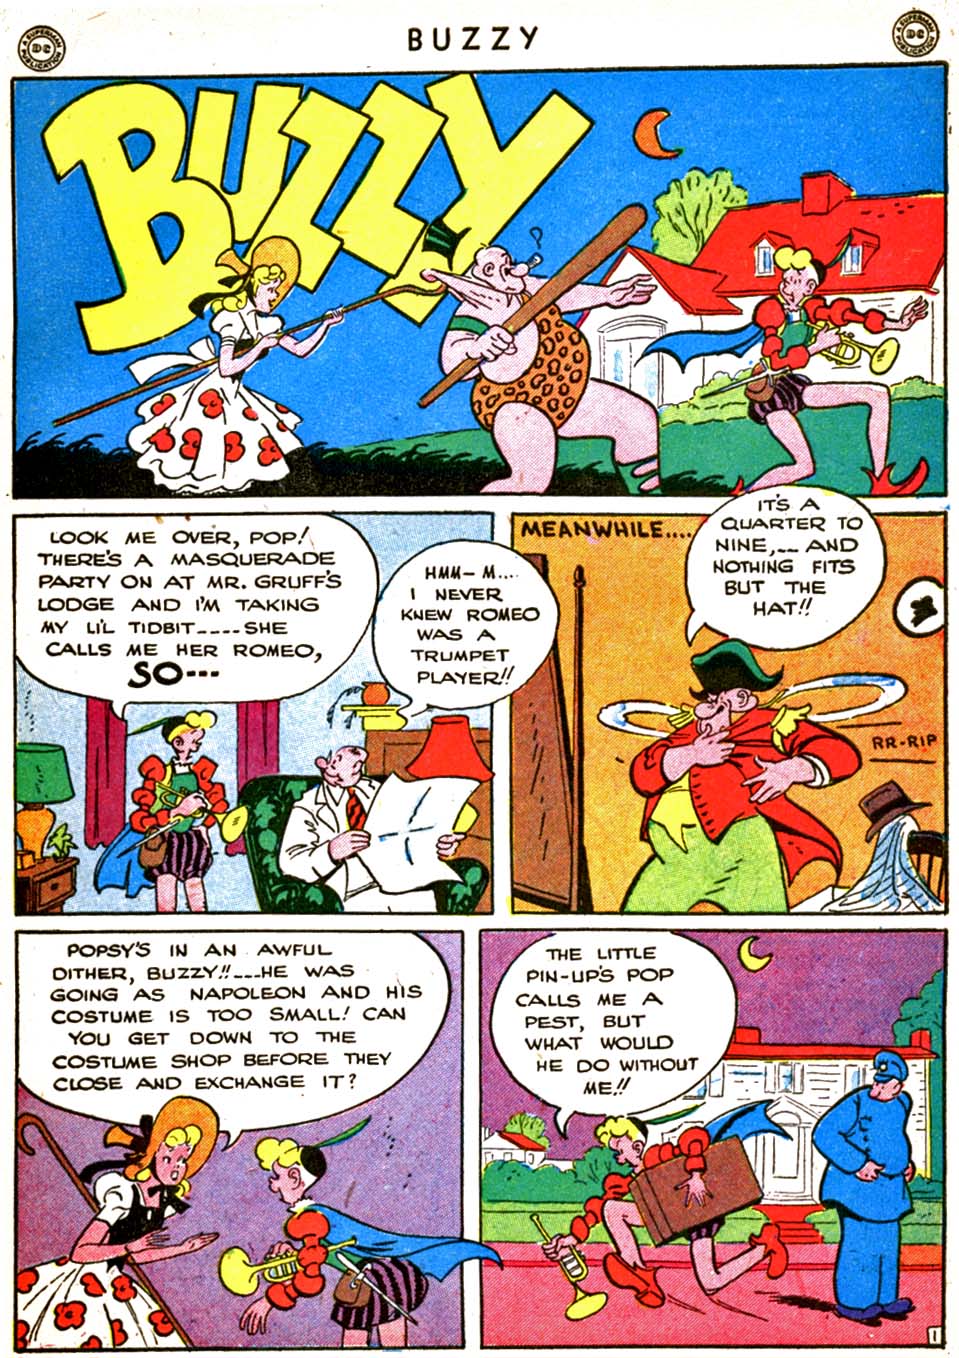 Read online Buzzy comic -  Issue #1 - 45